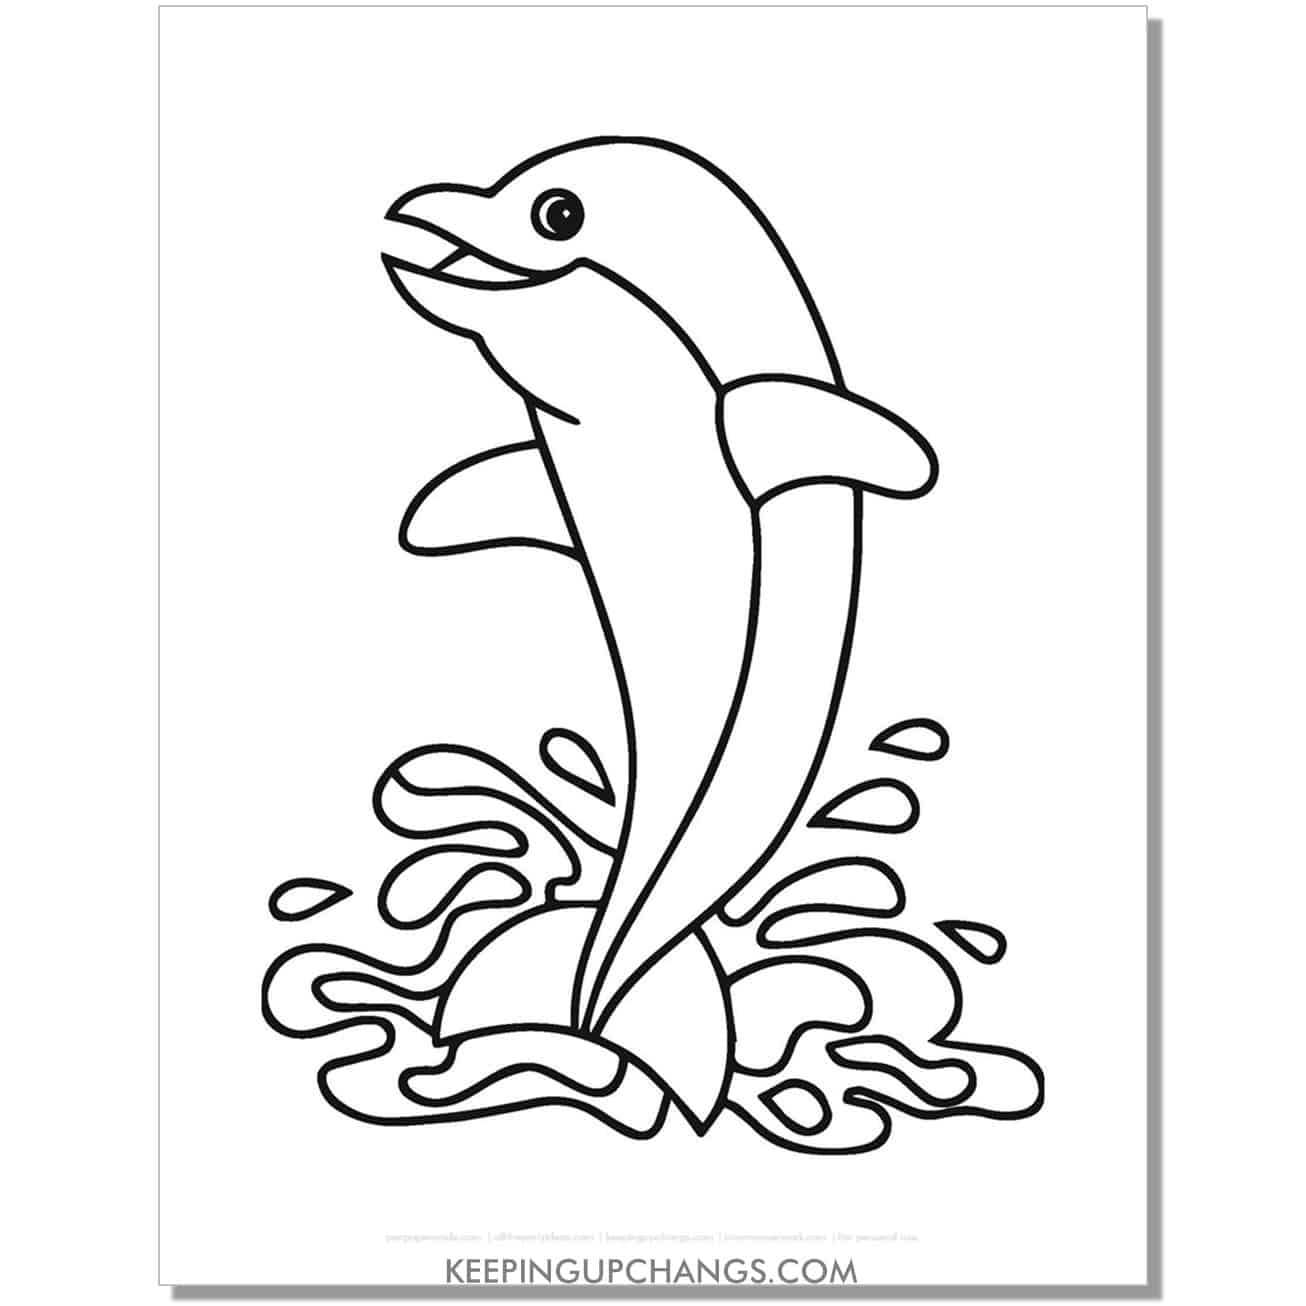 free dolphin splashing out of water coloring page, sheet.